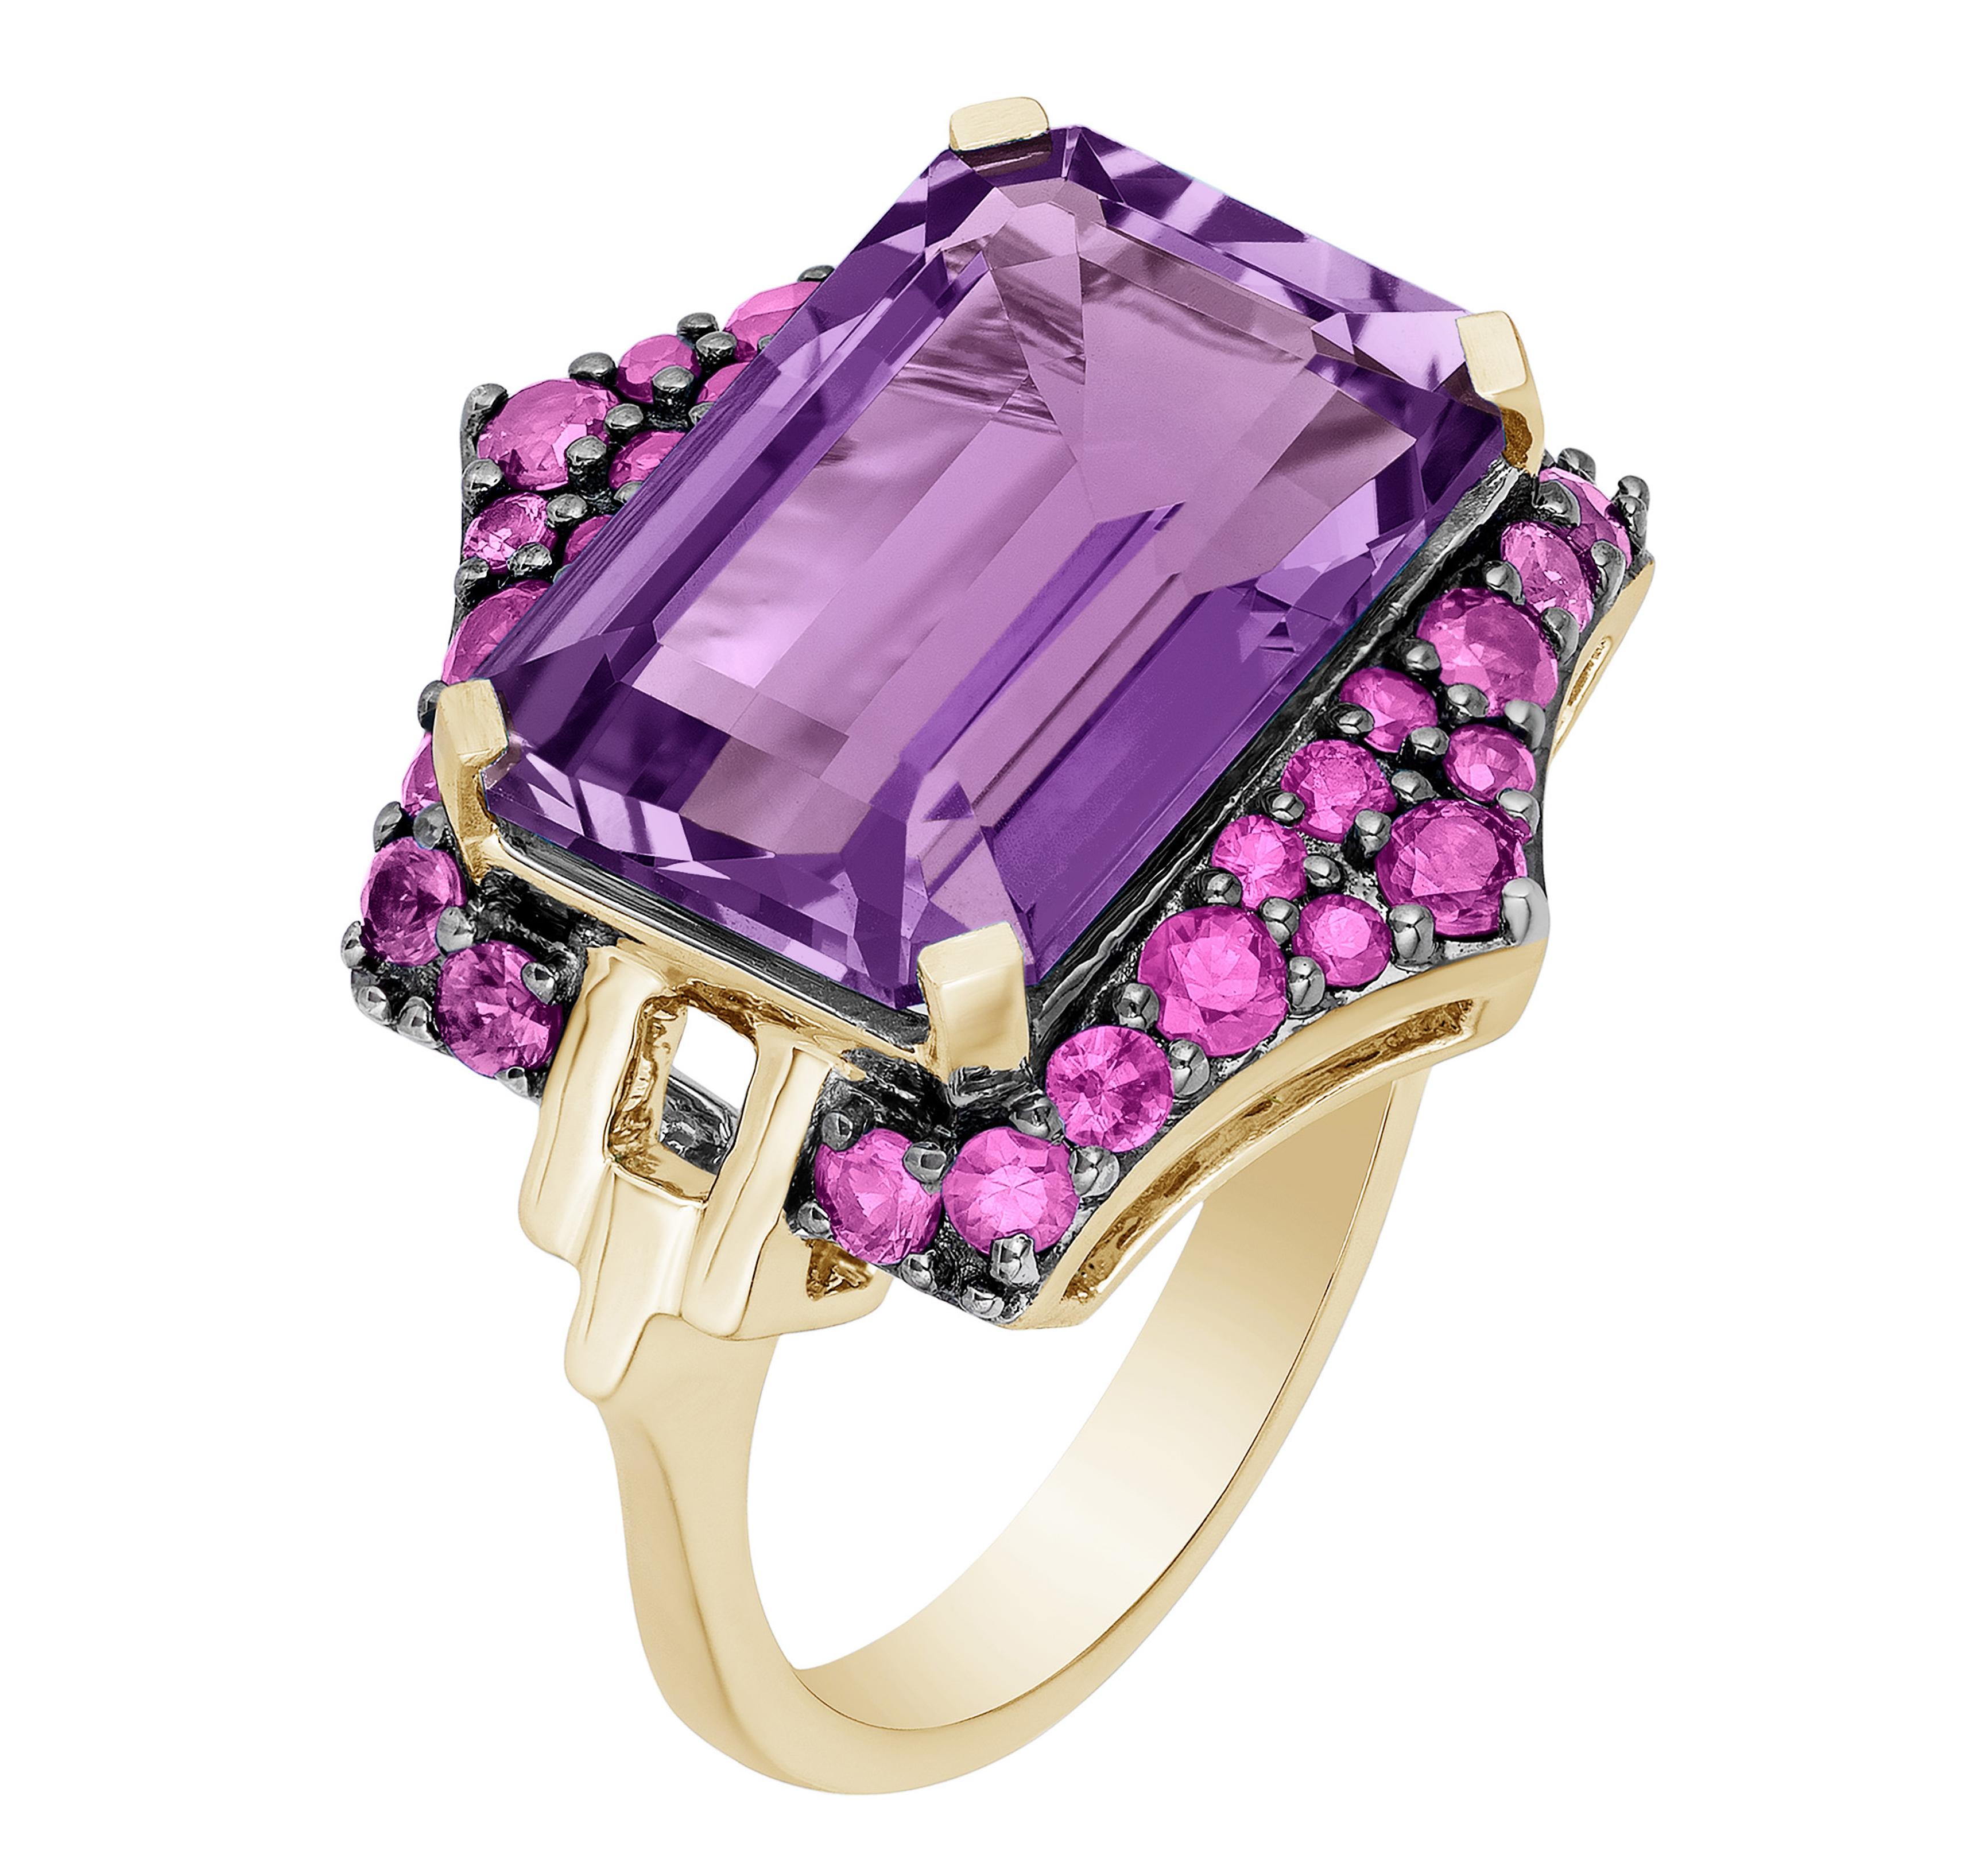 Contemporary Goshwara Emerald Cut Amethyst and Pink Sapphire Ring For Sale